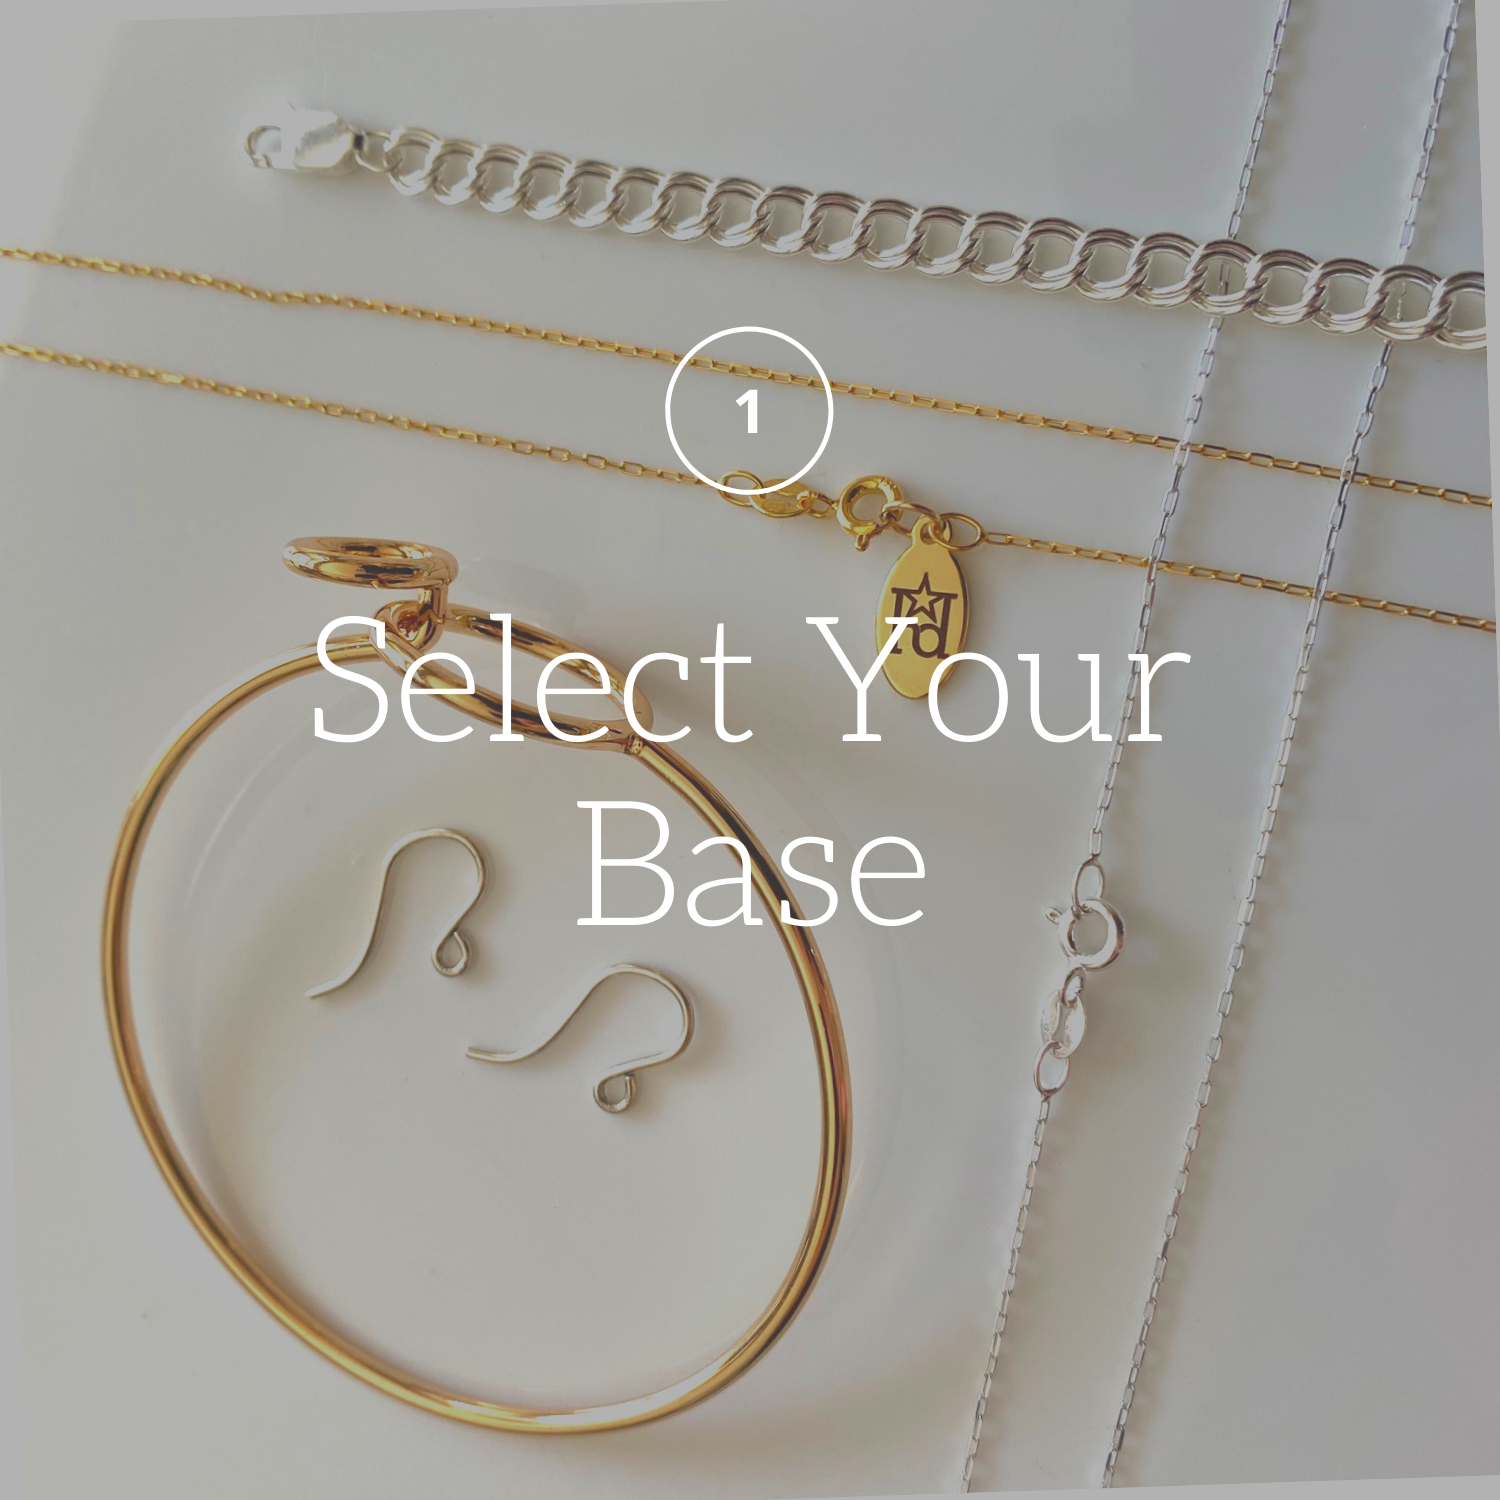 Step 1: Select your Base